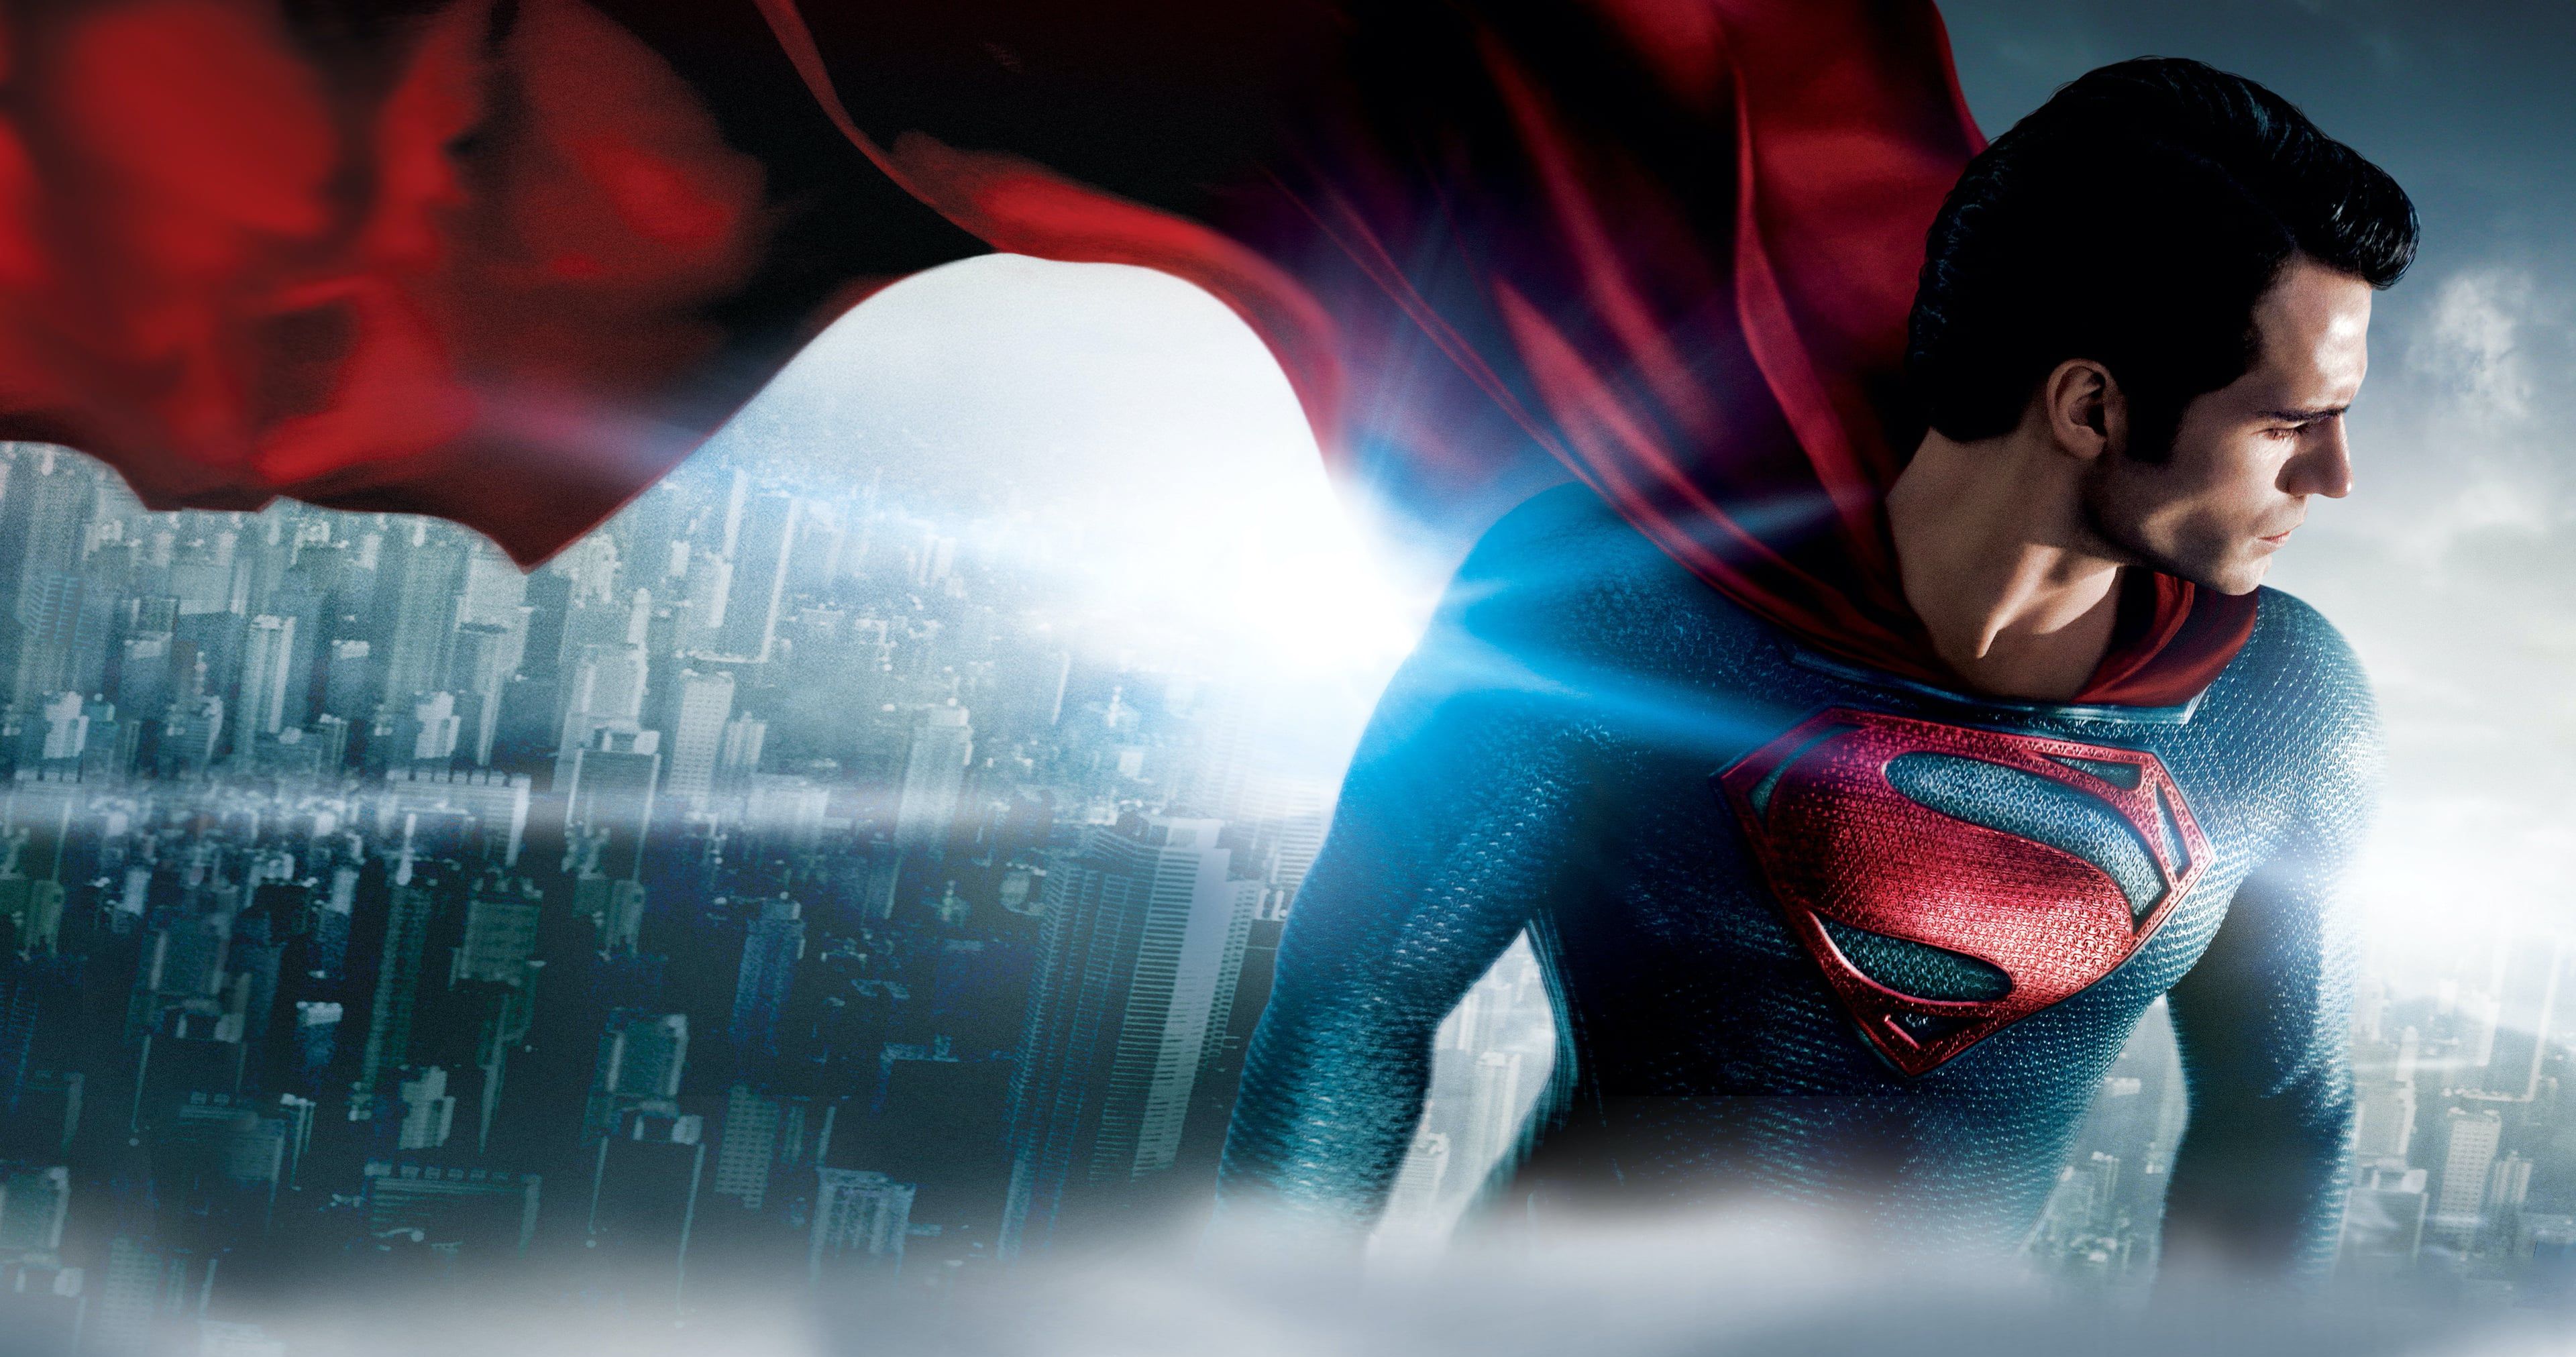 Man of Steel Trends as Fans Defend the Superman Movie from 'Lack of Heart' Criticism